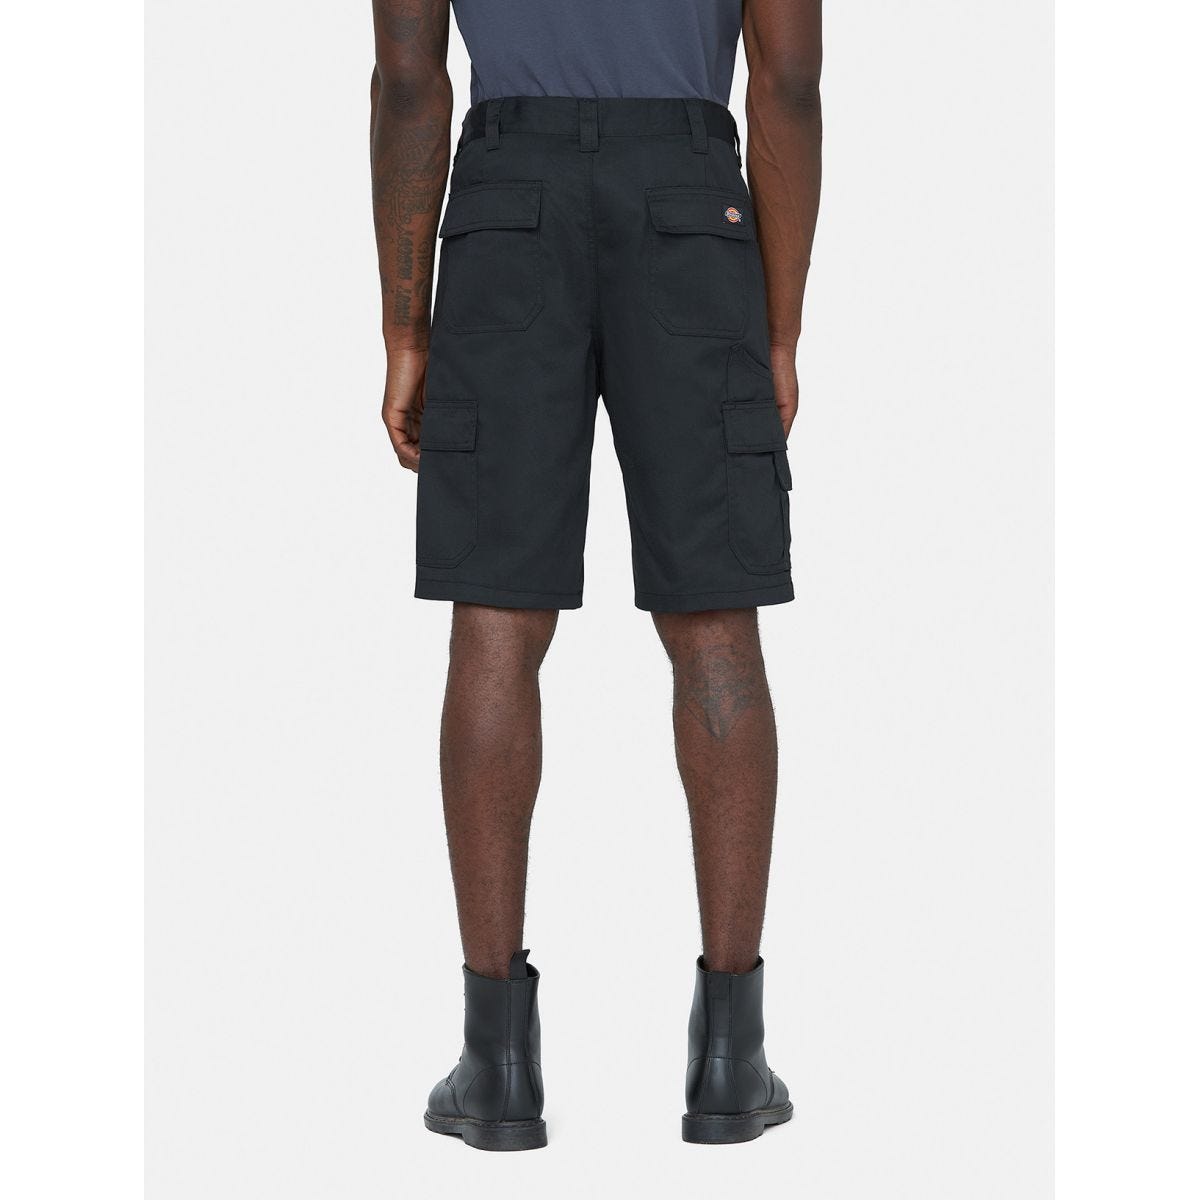 Short Everyday Noir - Dickies - Taille 44 1